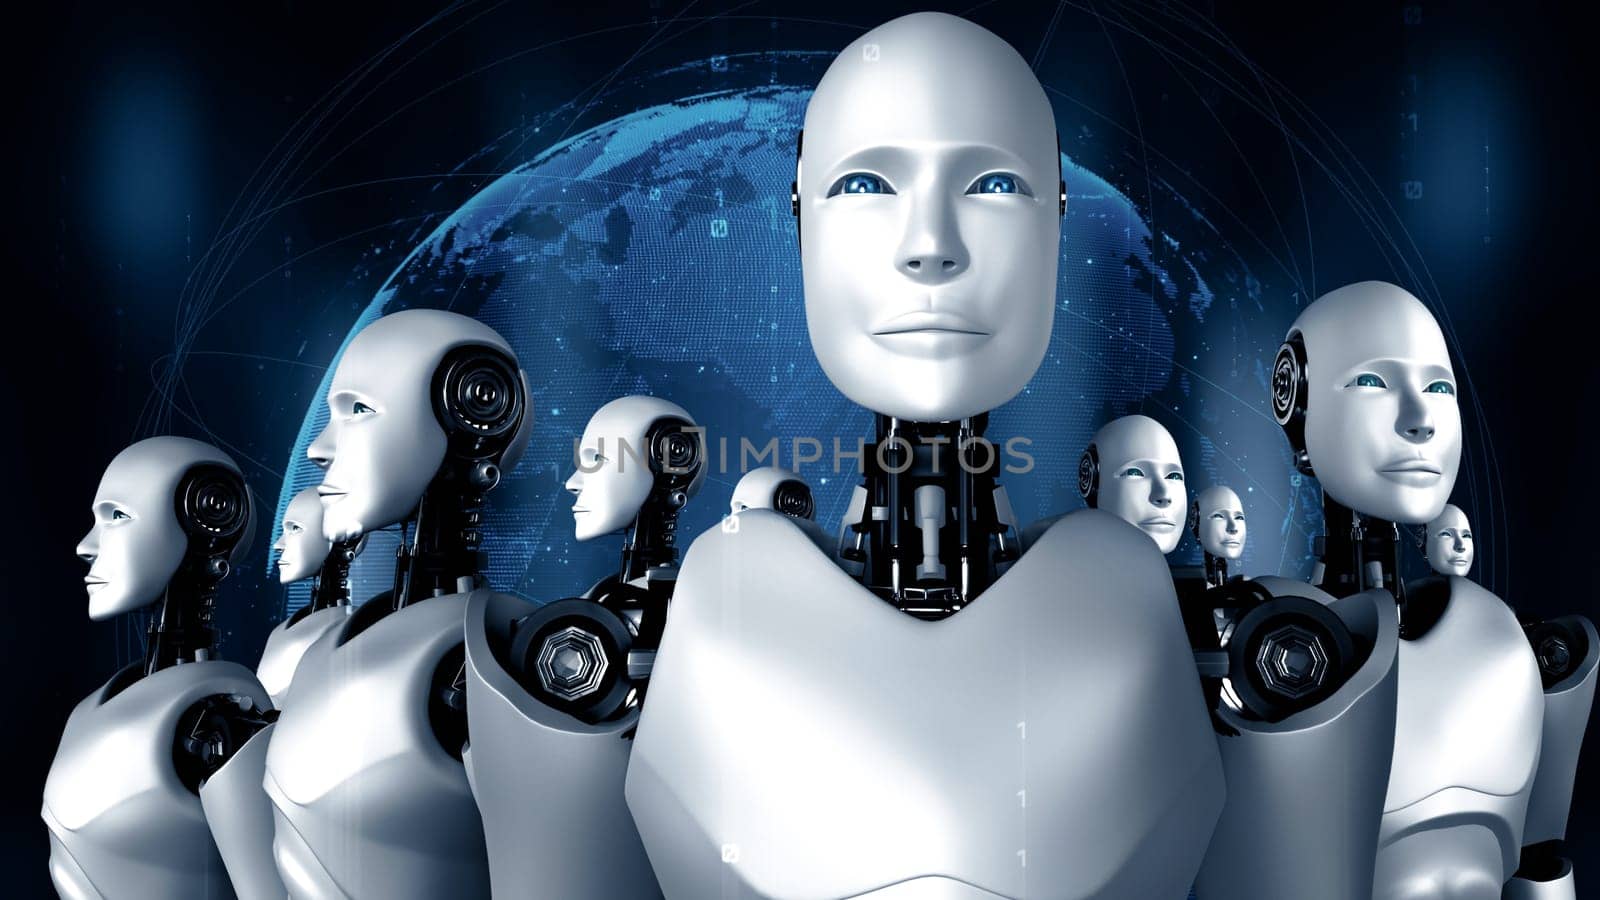 XAI 3D rendering of robot hominoid group by biancoblue